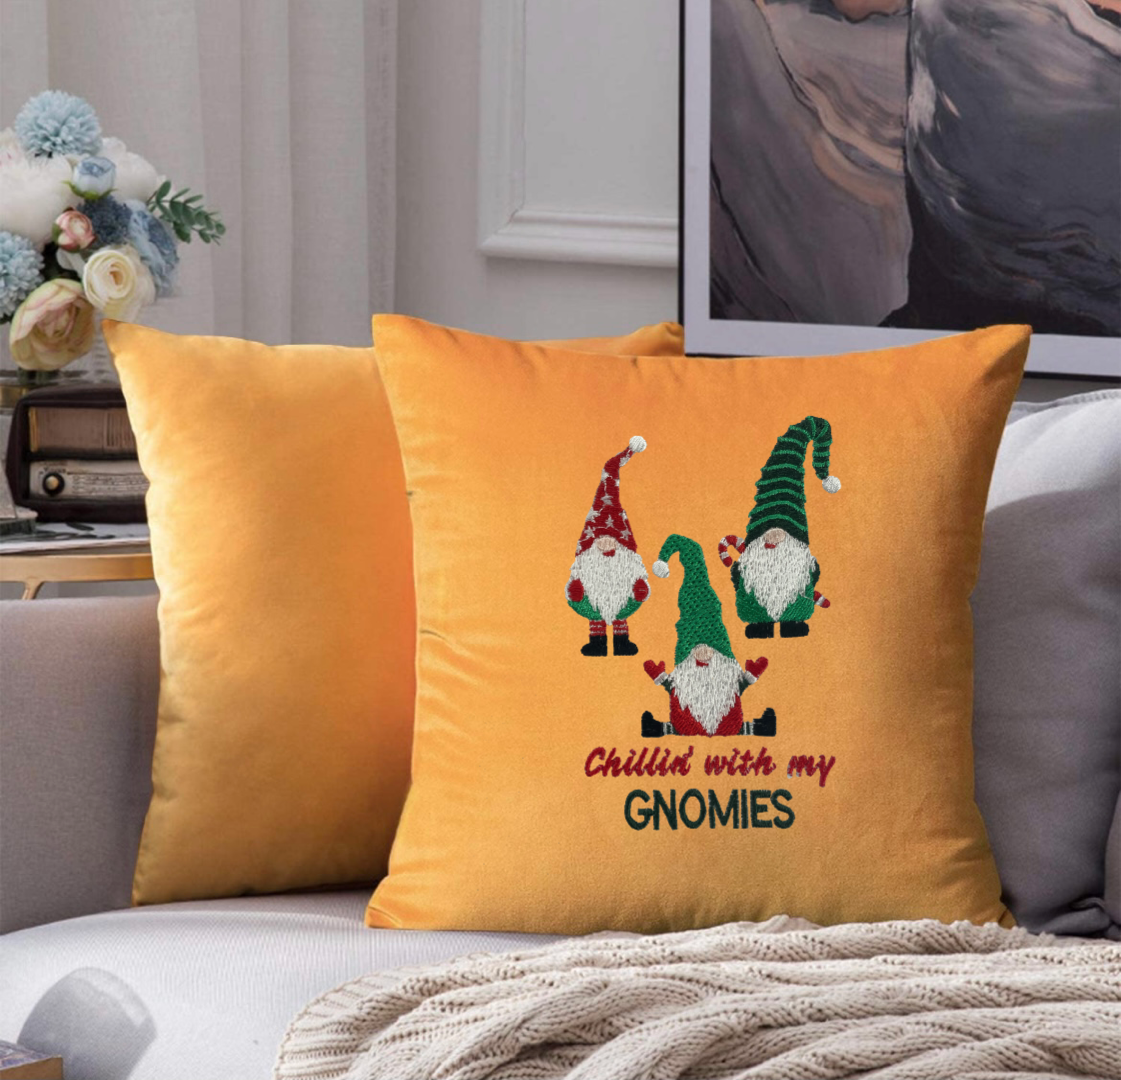 Christmas Gnomes Embroidered Throw Pillow Cover 18" x 18” Cotton or Velvet Accent Pillow Cover Zip Closure.